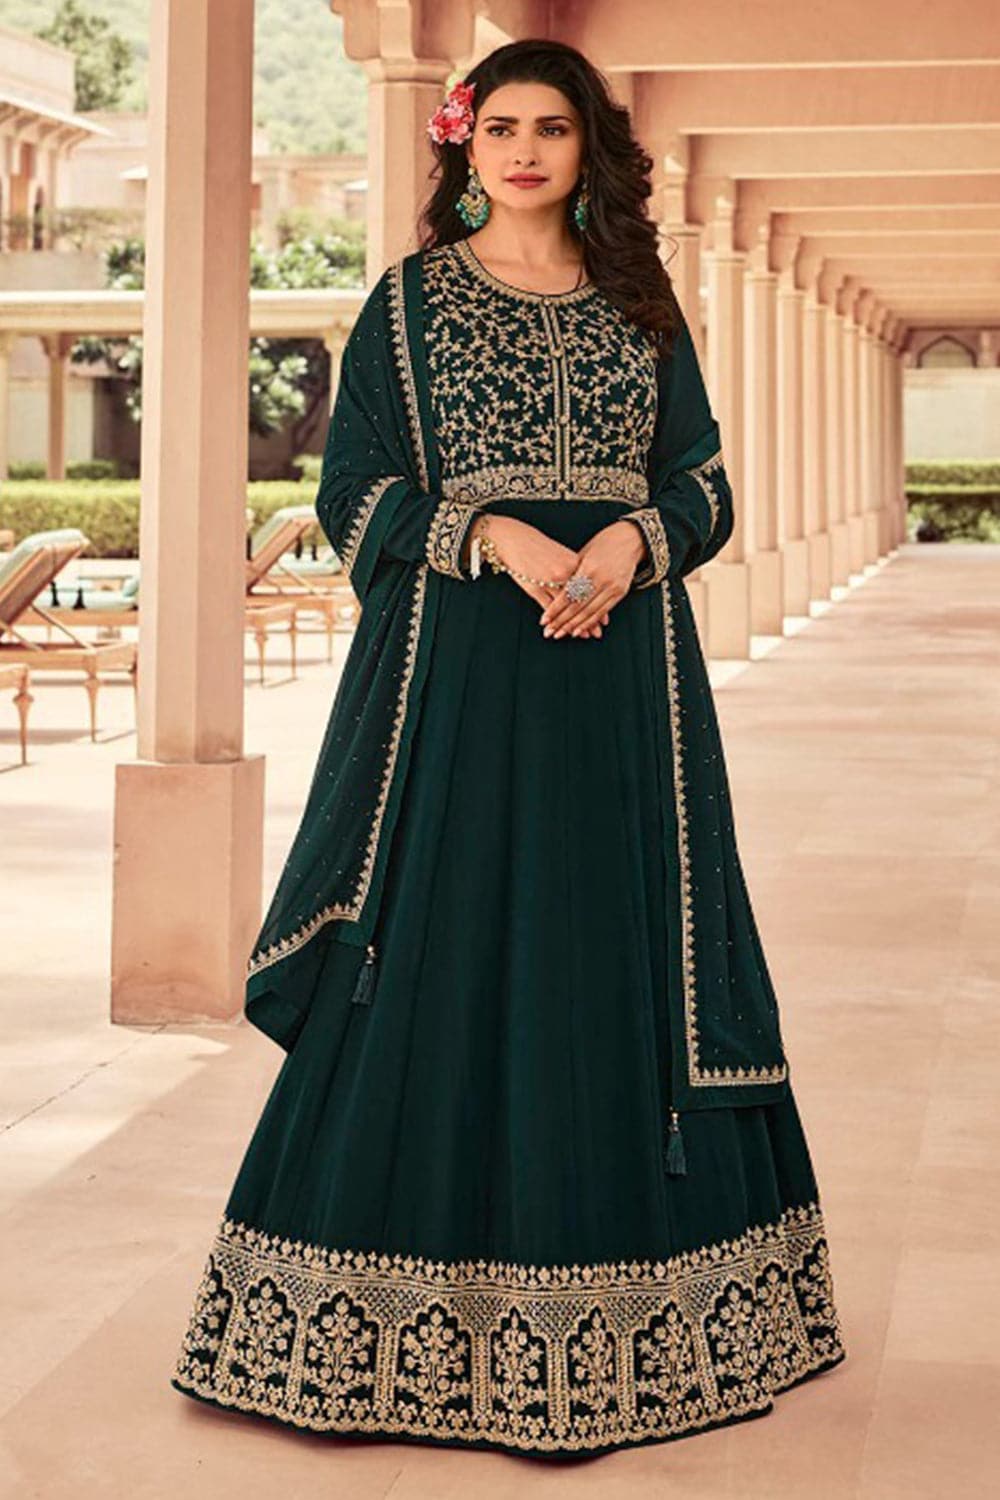 Readymade-salwar-suits, Fully-stitched-salwar-suits,  Readymade-salwar-suit-wholesale, Salwar-suit-online-shopping,  Readymade-salwar-suit-uk, Punjabi-readymade-salwar-suit,  Party-wear-readymade-salwar-suit